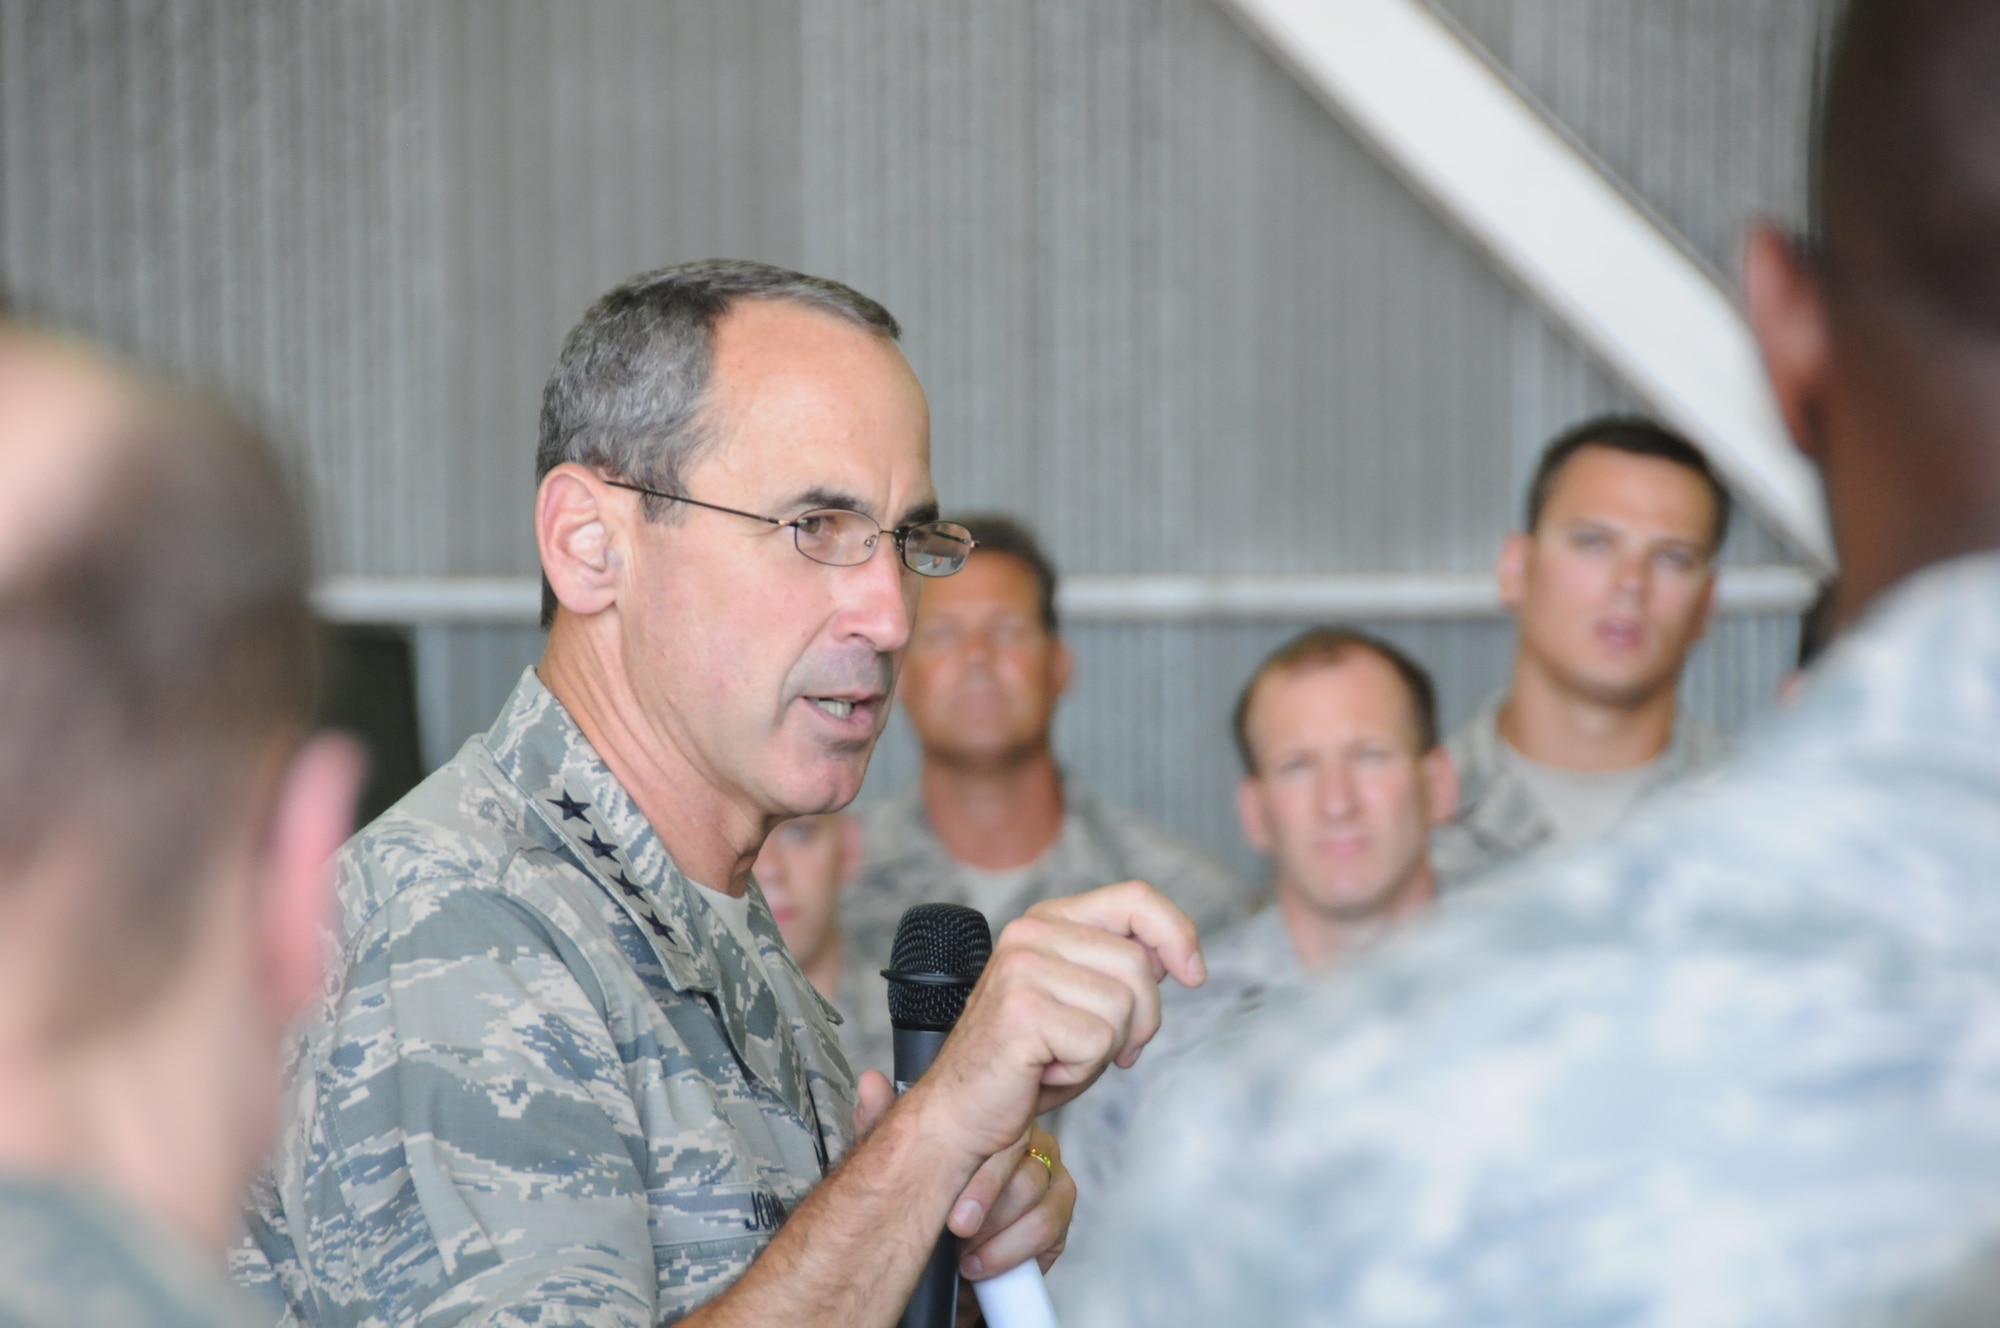 Gen. Raymond E. Johns Jr., Air Mobility Command commander, speaks with Airmen of the 313th Air Expeditionary Wing at a non-disclosed base in Western Europe on Aug. 16, 2011. The general answered questions and addressed issues and concerns and also thanked Airmen for their service and the ability to answer the nation's call at a moment's notice. The wing supports Operation Unified Protector, a NATO-led mission in Libya to protect civilians and civilian-populated areas under threat of attack. The 313th AEW provides aerial refueling to U.S. and coalition aircraft with KC-135 Stratotankers and KC-10 Extenders. (U.S. Air Force Photo/1st Lt. Rusty Ridley)